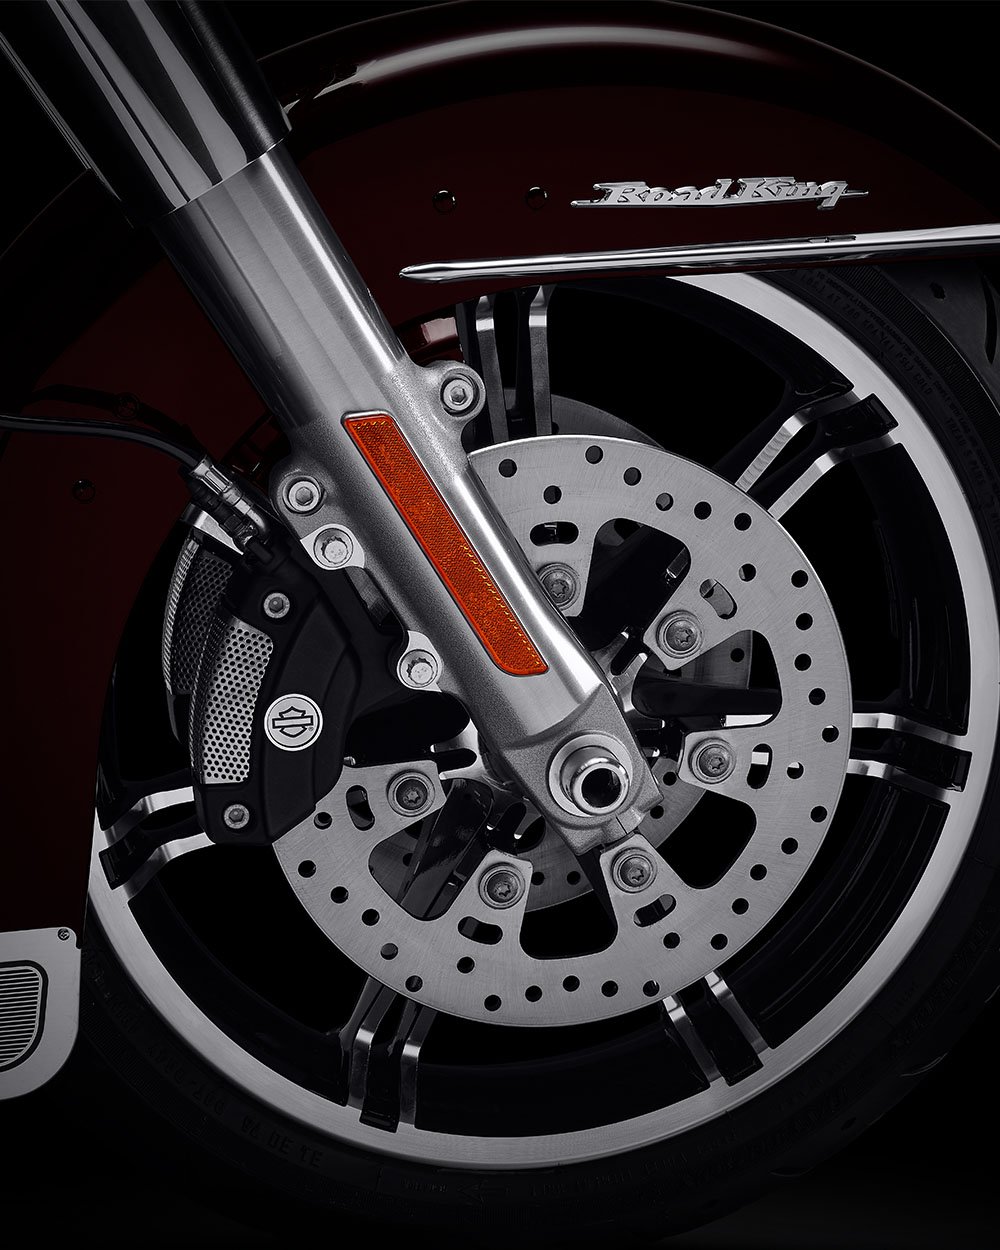 Reflex Linked Brembo Brakes with optional ABS on a 2022 Road King motorcycle